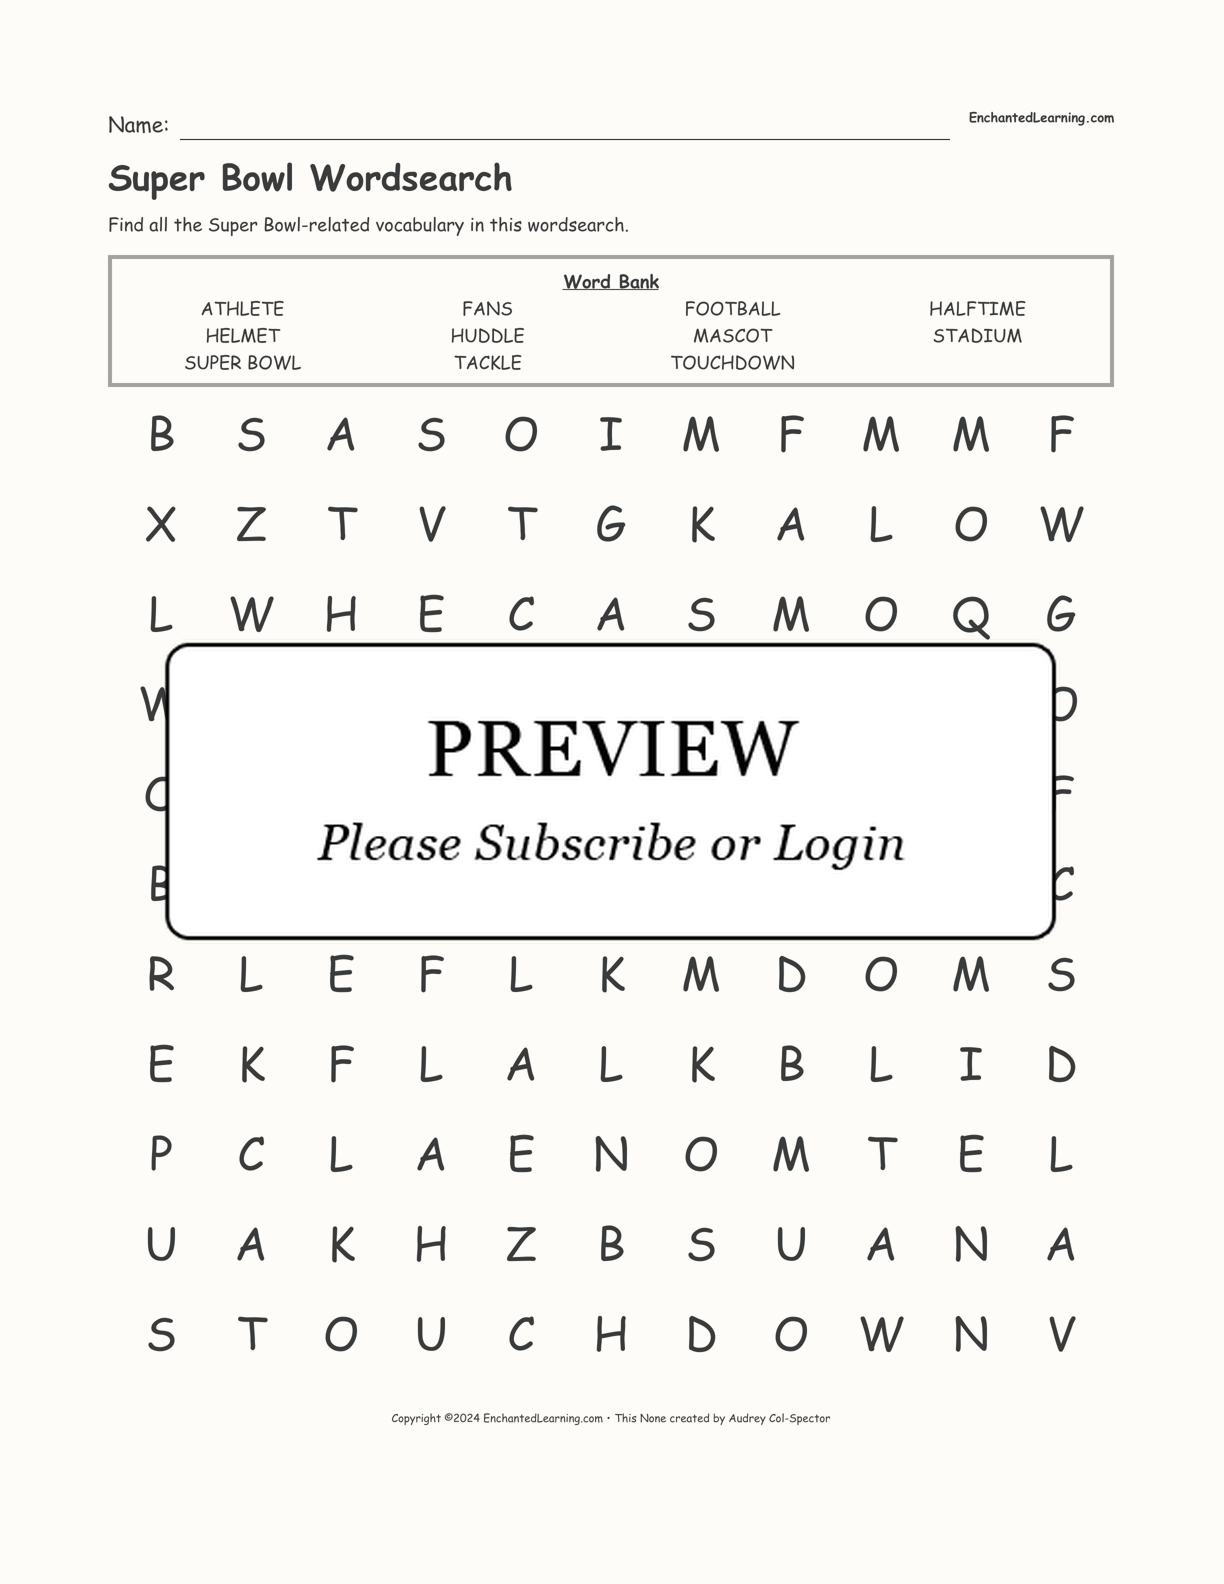 Super Bowl Wordsearch interactive worksheet page 1